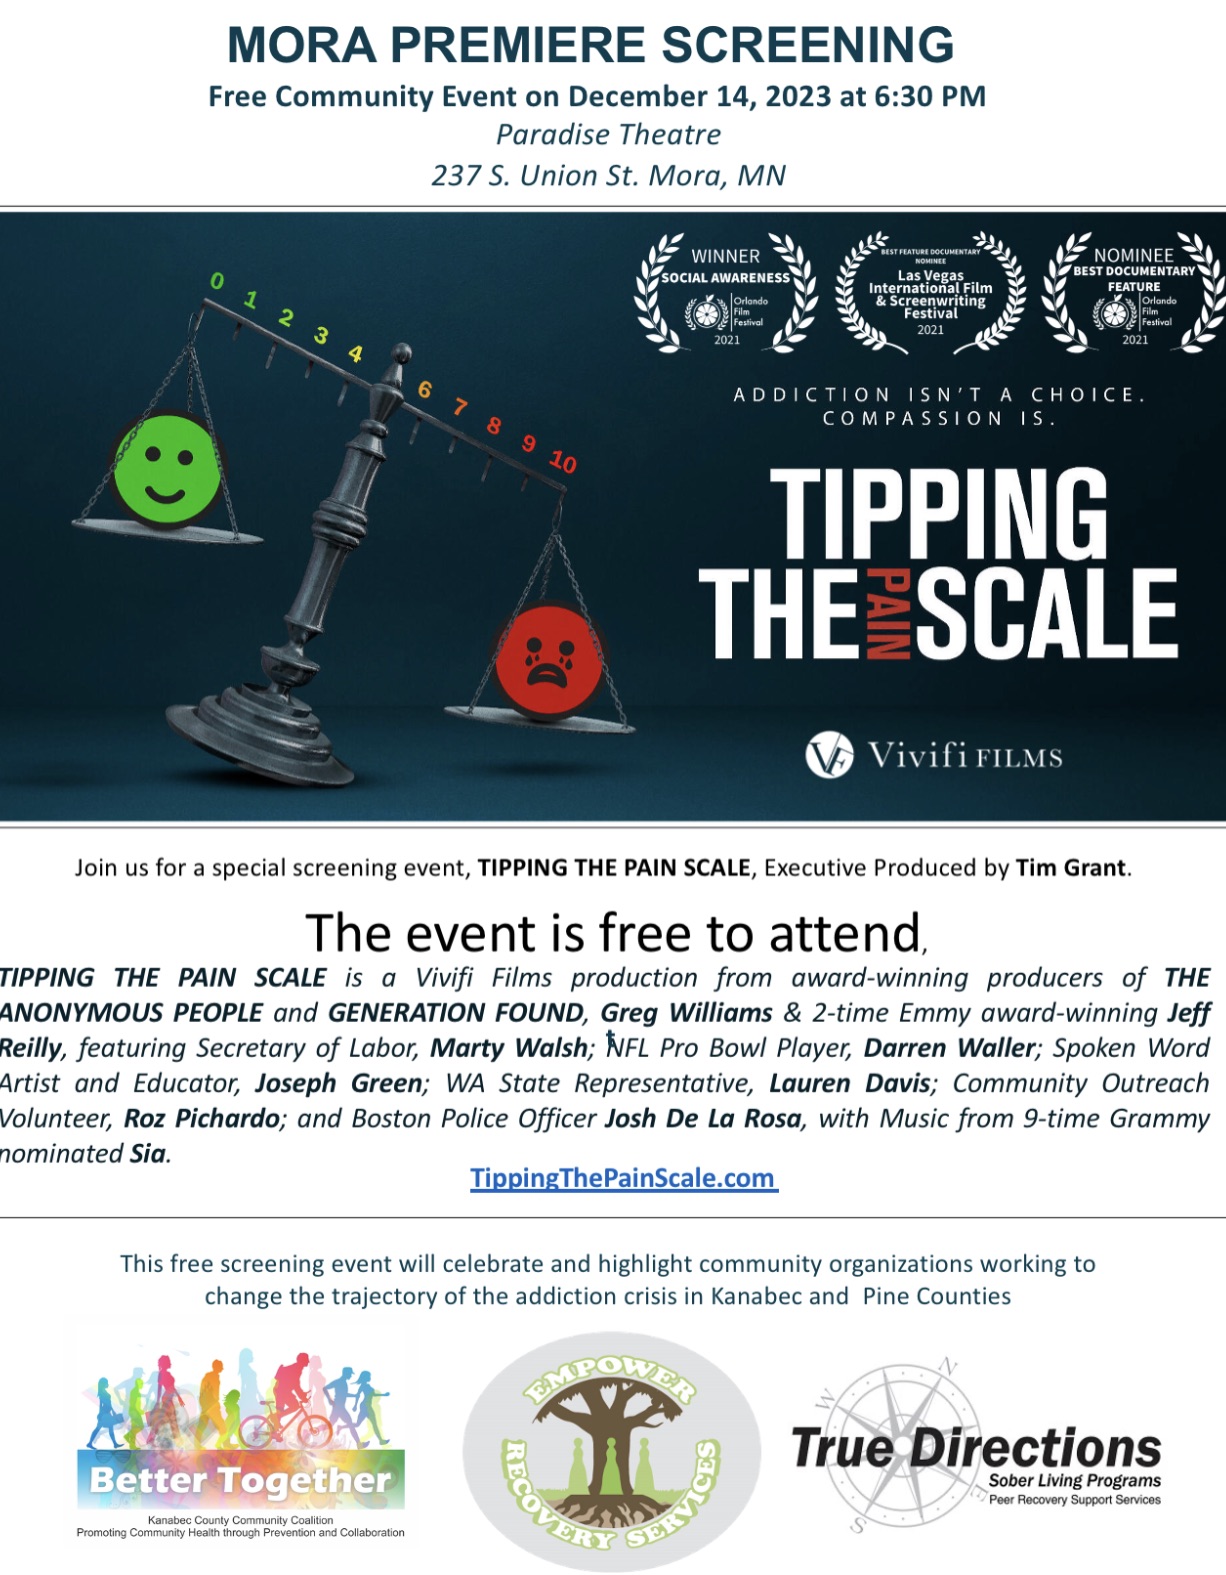 Flyer with info about "Tipping the pain scale" showing at Paradise Theatre